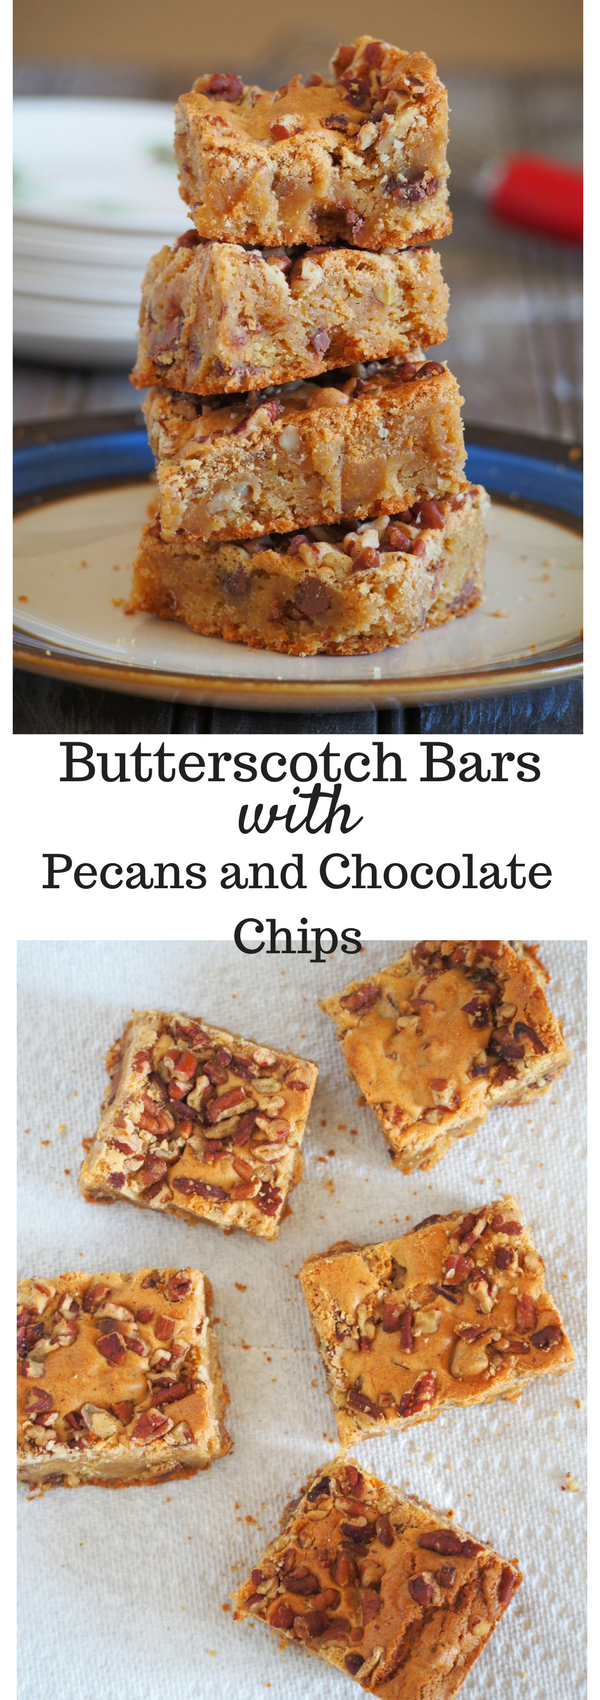 Bake this chewy Butterscotch Bars with Pecans and Chocolate Chips and you will have delightful treats to munch on any time of day. With the nuts to add some crunch and the chocolate chips to add flavor, these treats have it all in the bag!